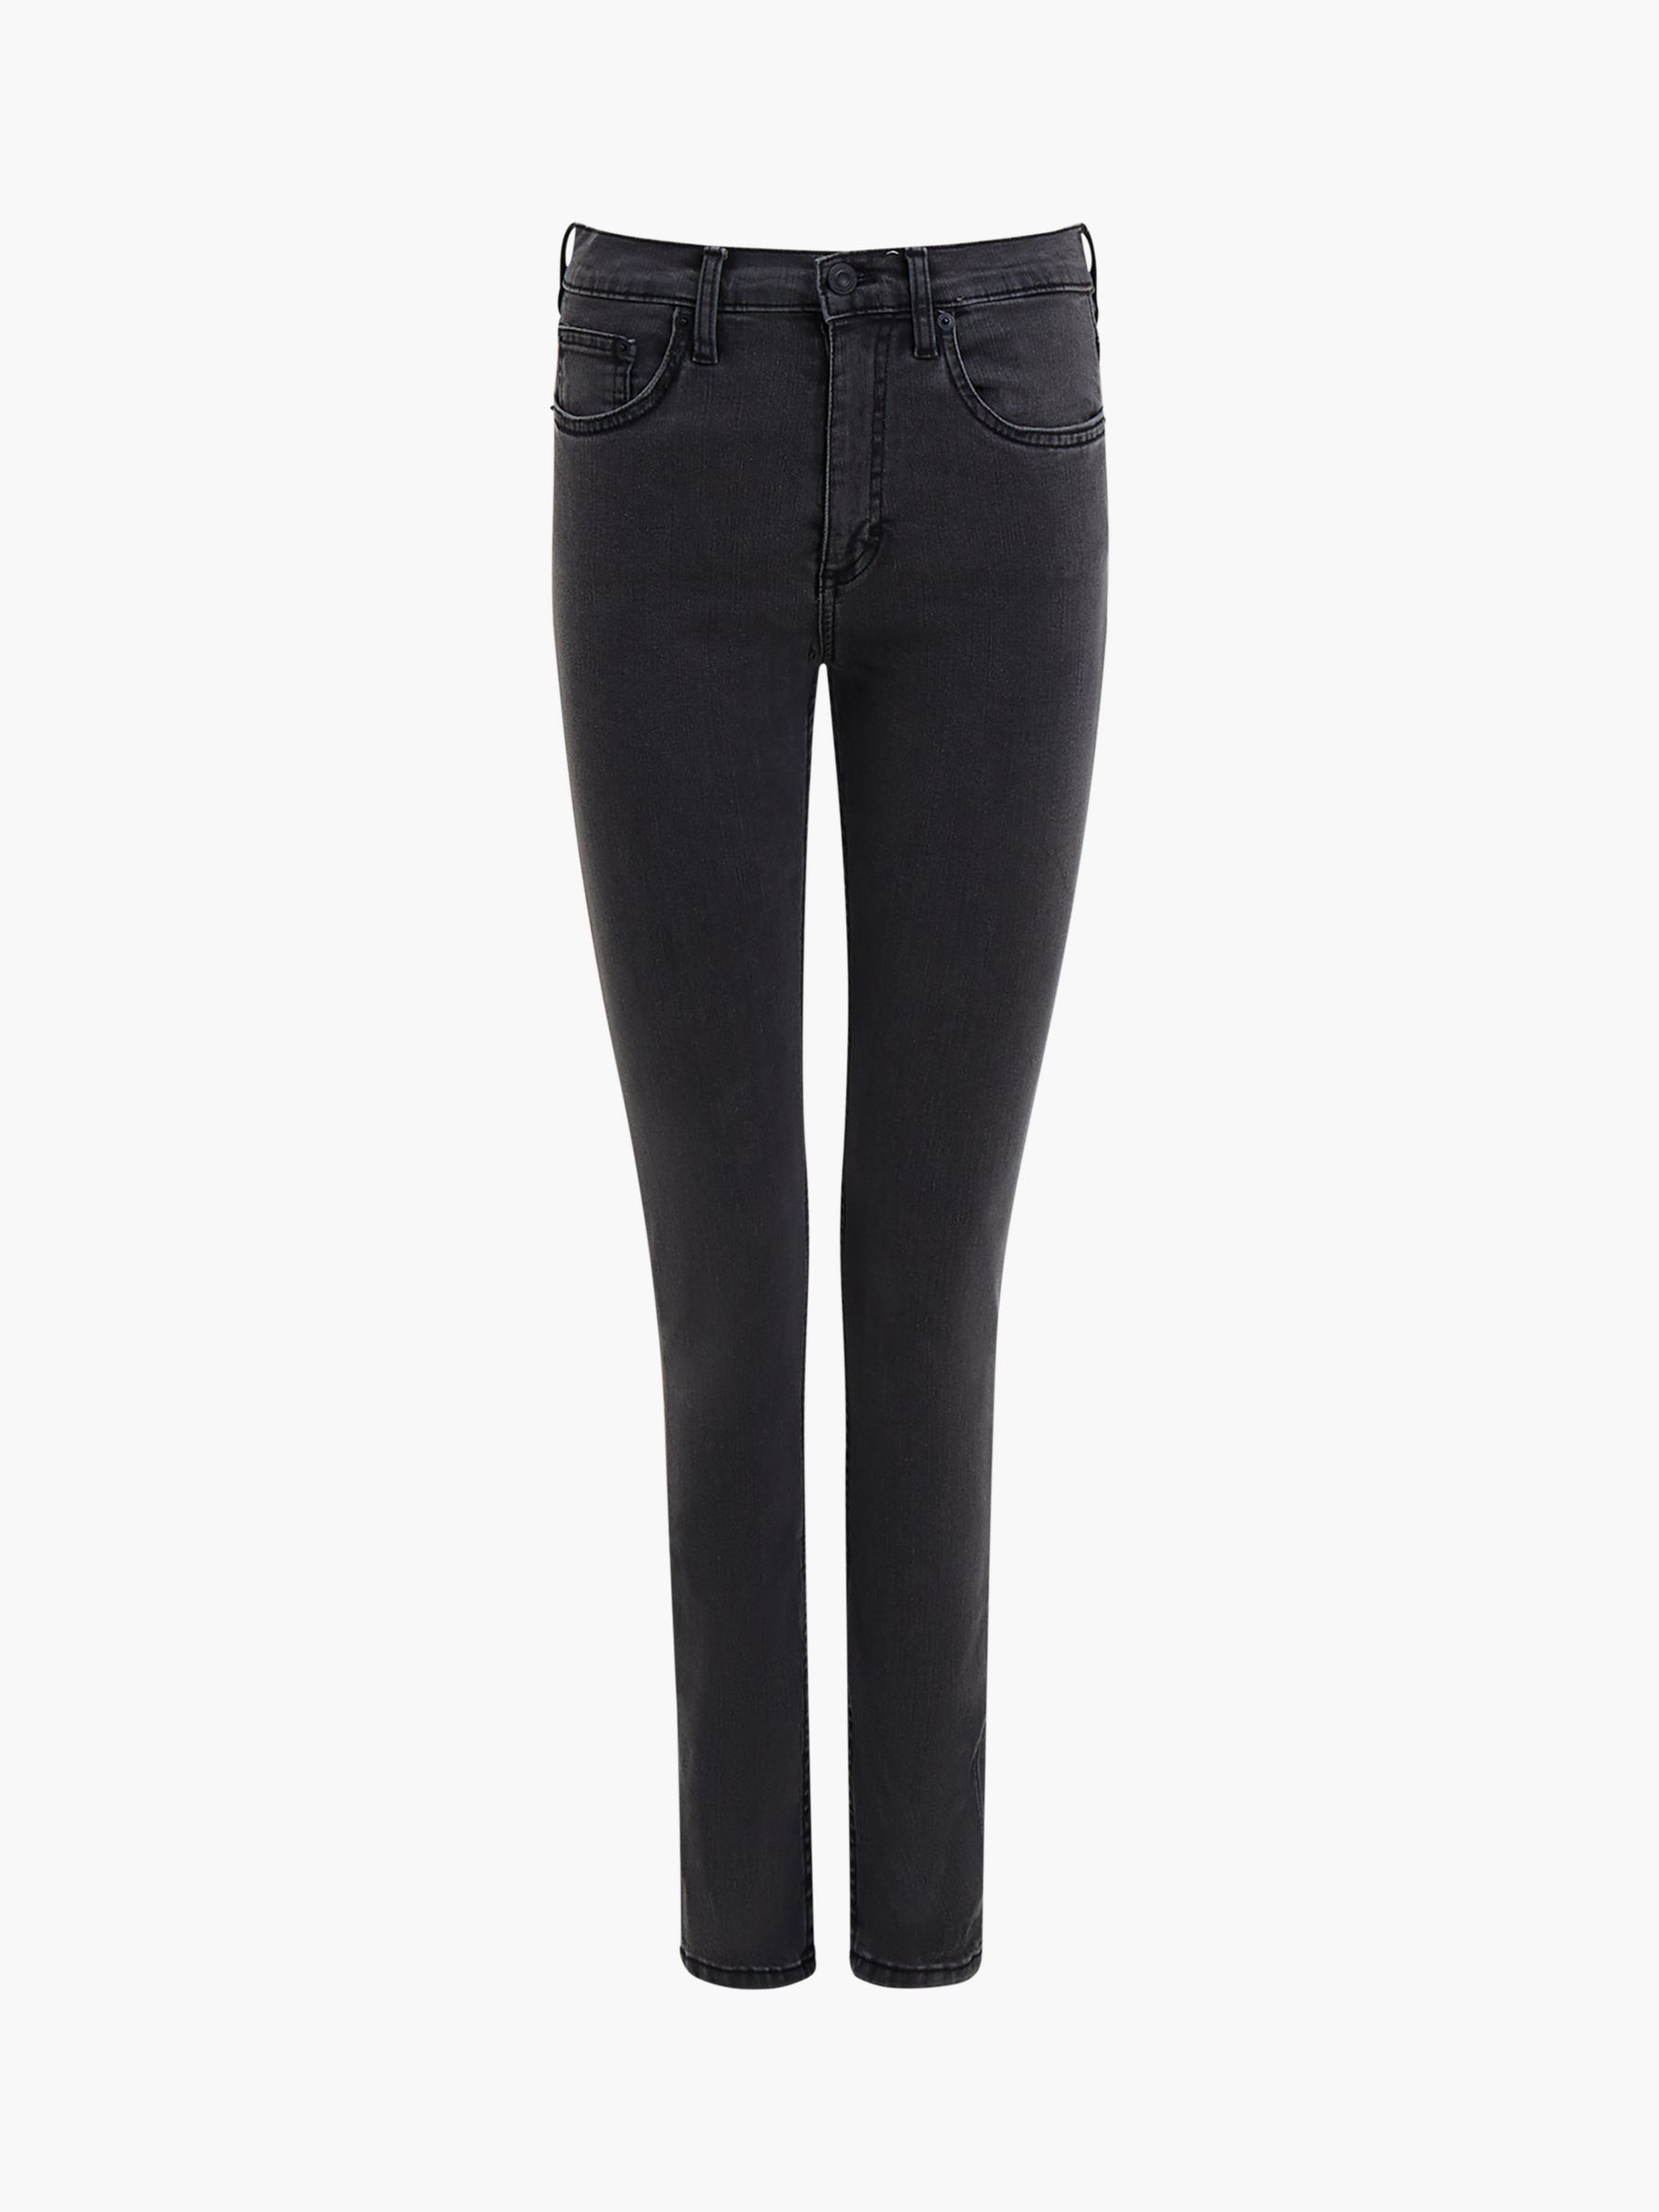 French Connection Rebound Response Skinny Jeans, Charcoal, 6